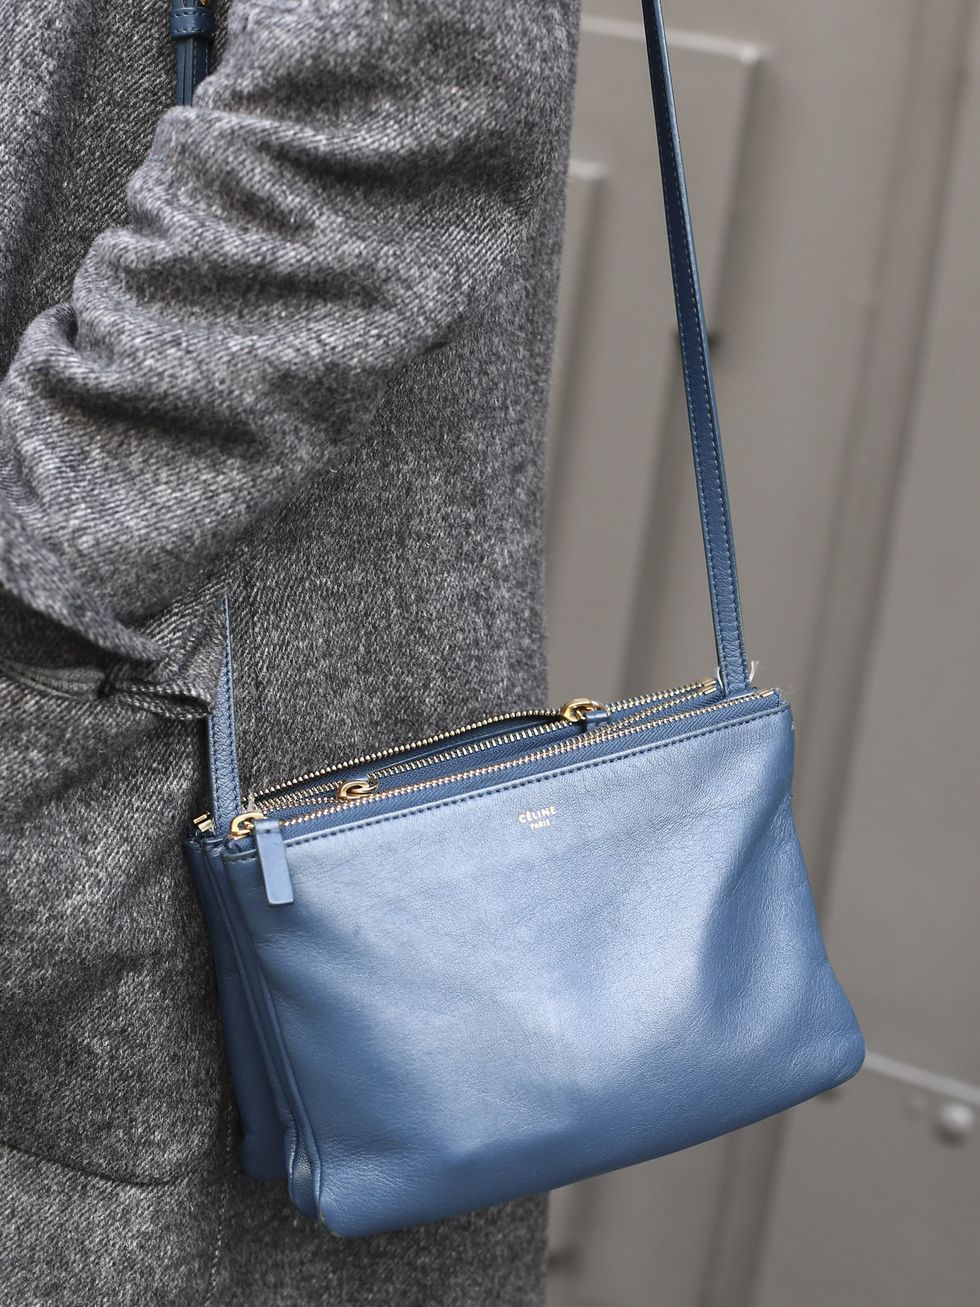 Blue, Bag, Textile, Style, Fashion accessory, Electric blue, Shoulder bag, Fashion, Azure, Luggage and bags, 